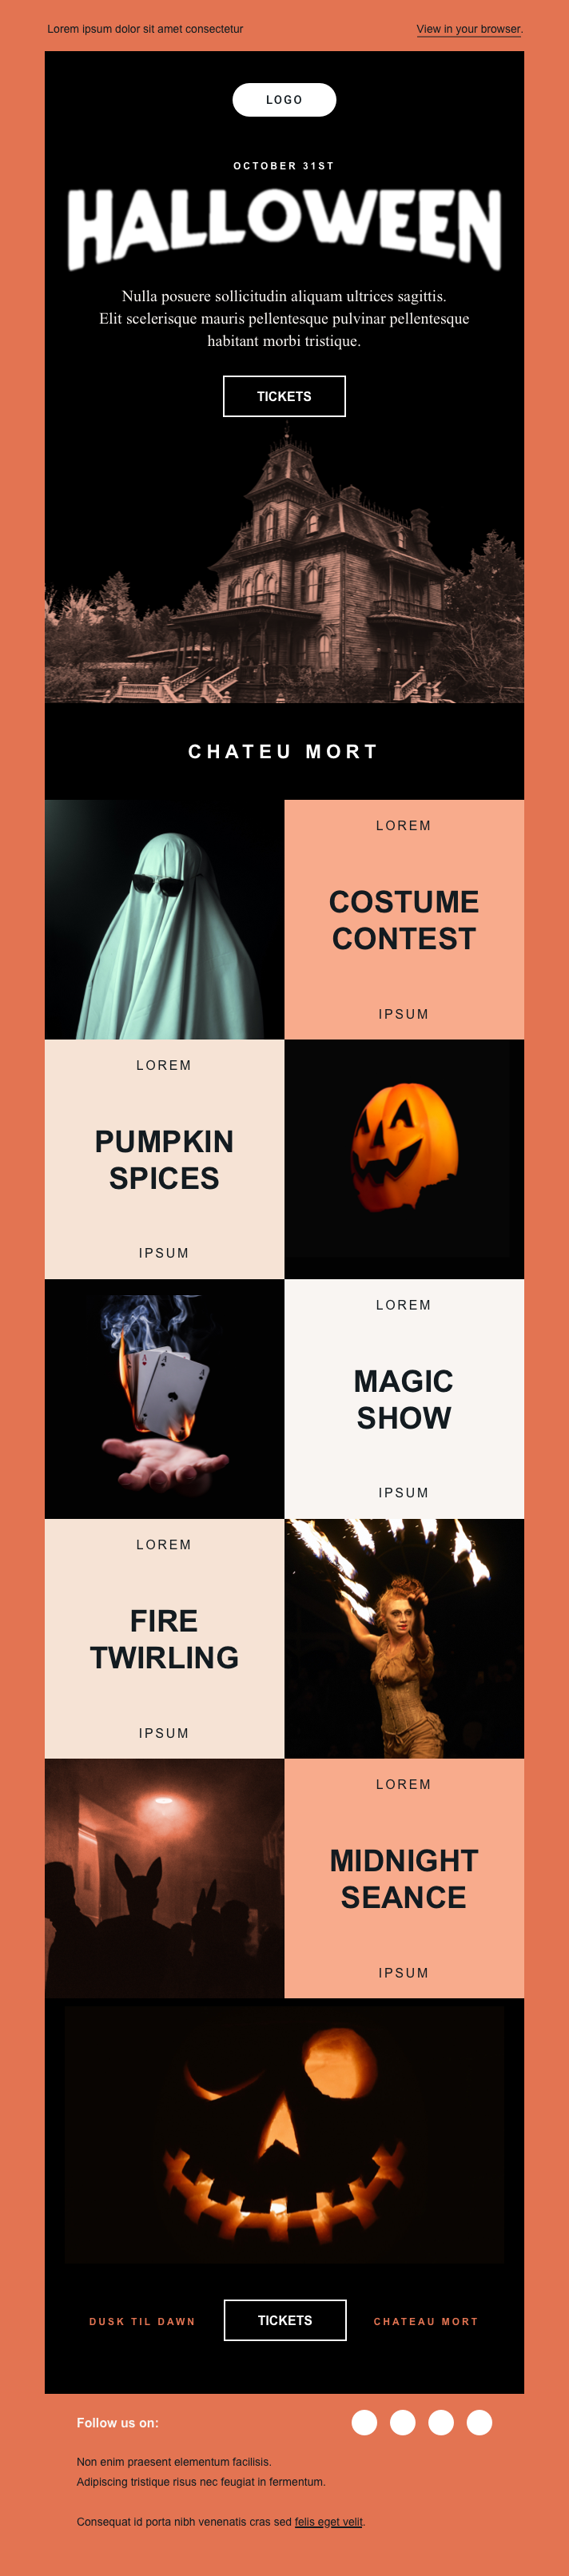 Orange Halloween themed email campaign.